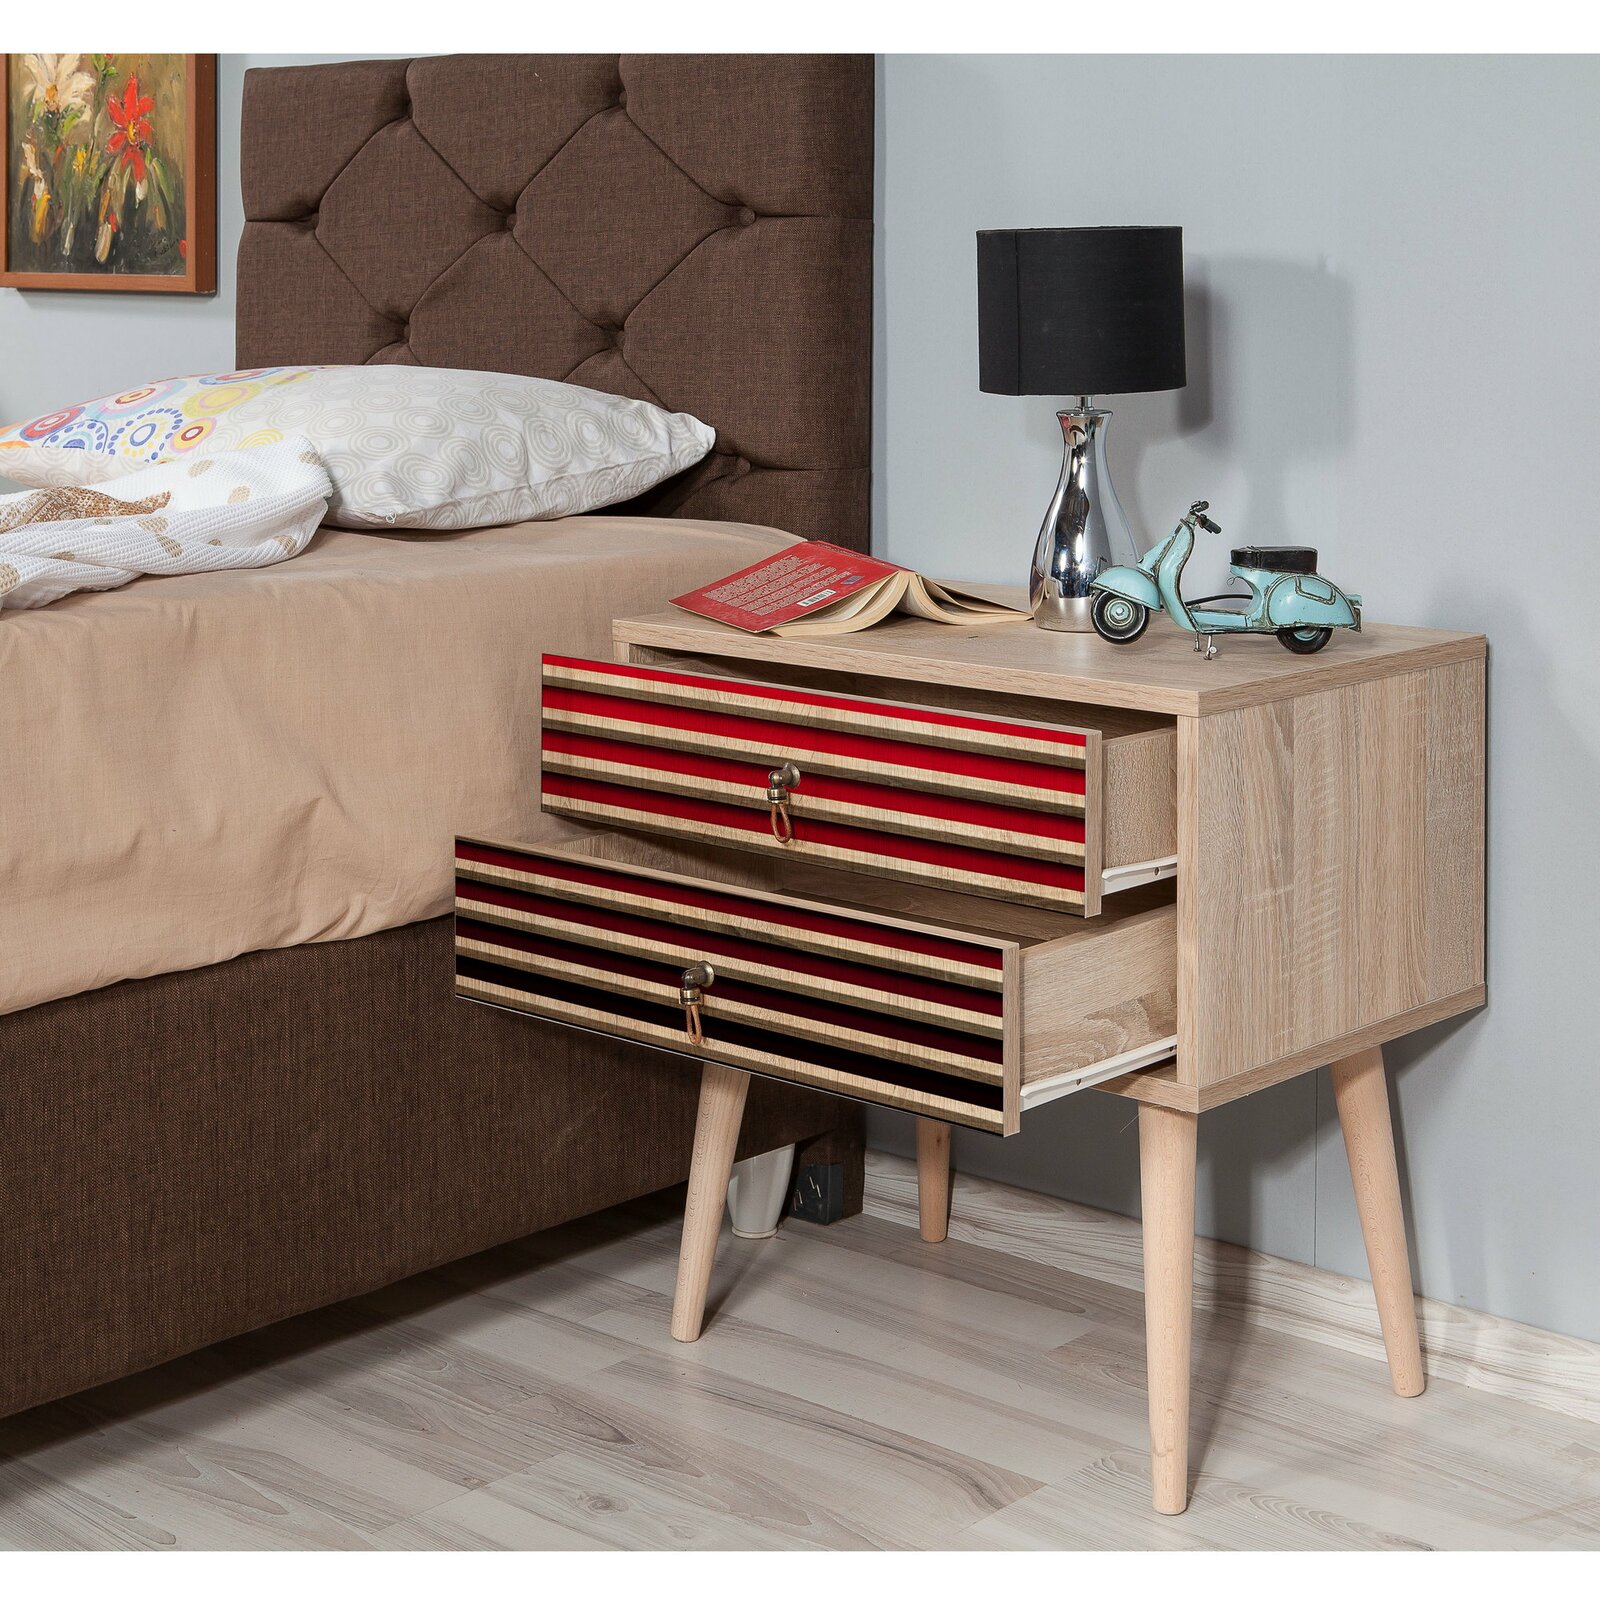 Bless international Manufactured Wood Nightstand